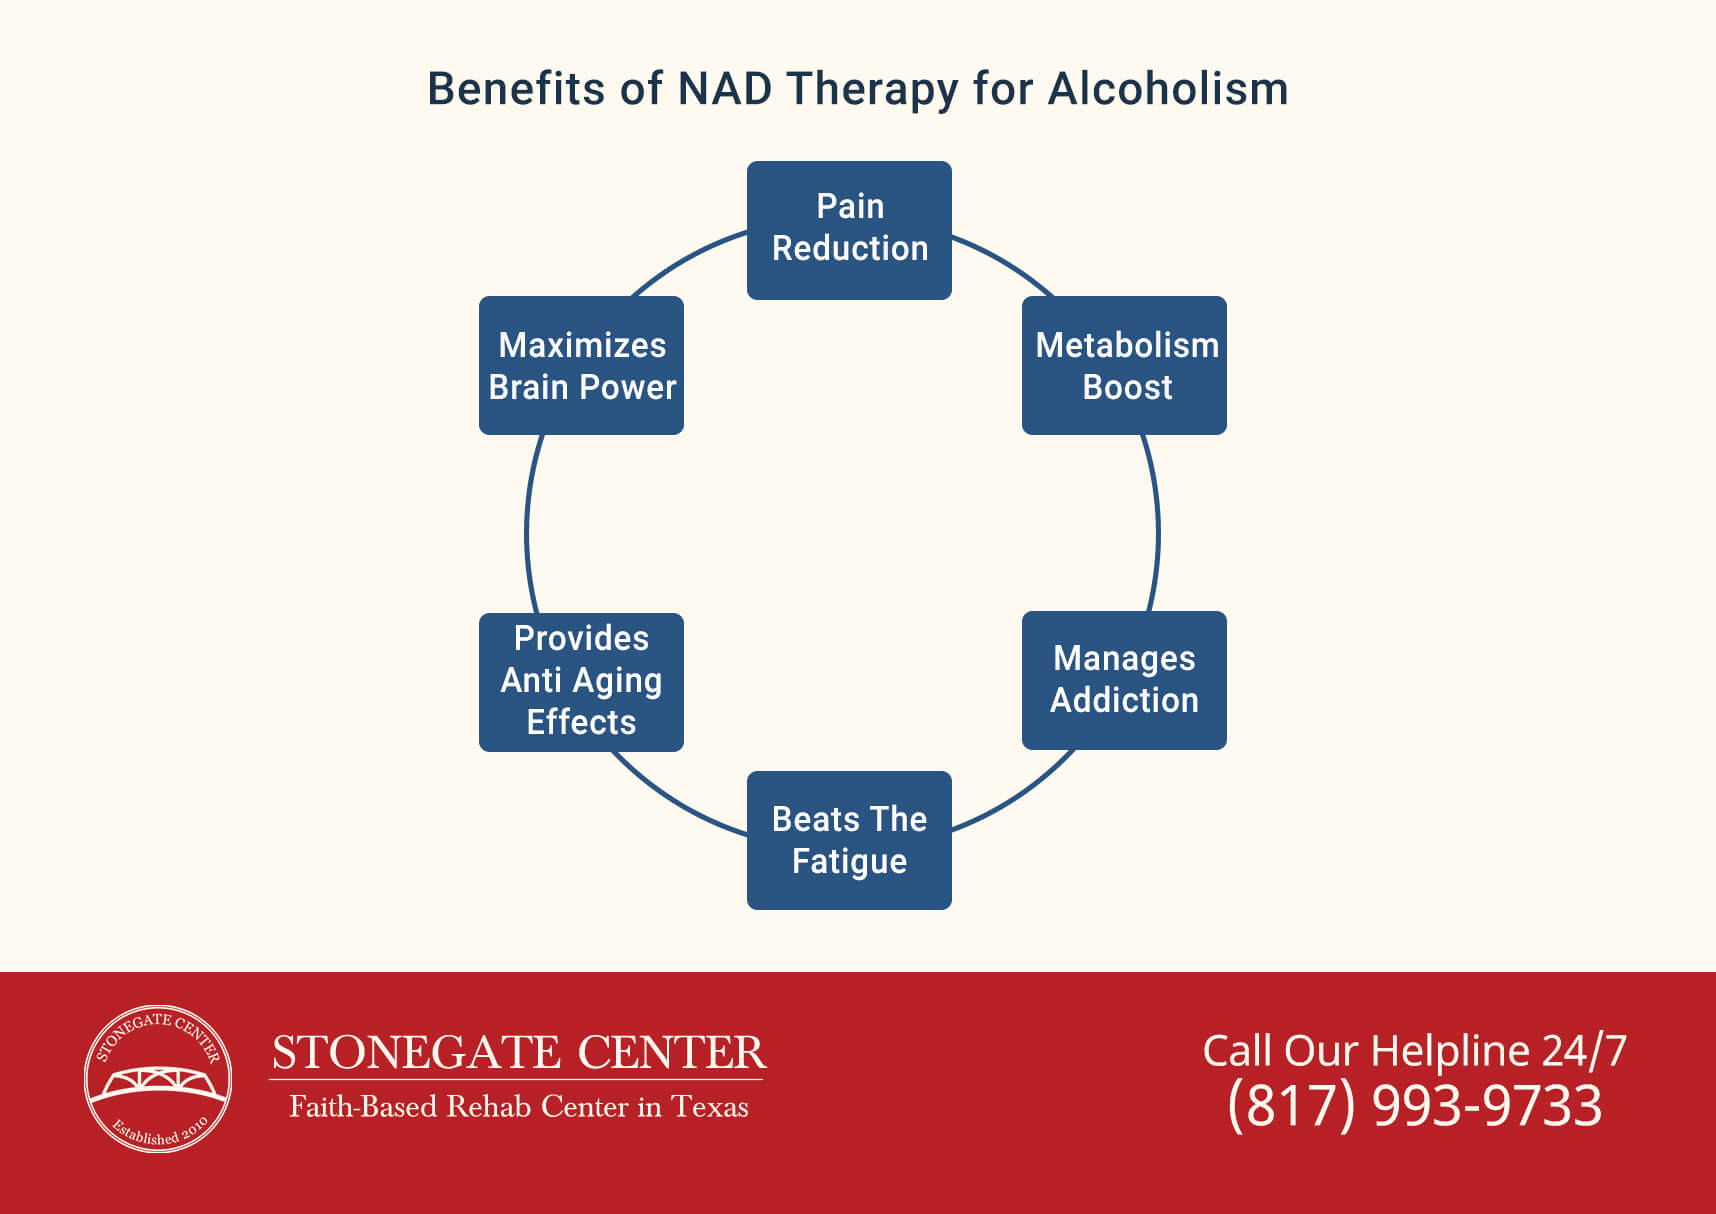 Stonegate Center Blog - Does NAD Therapy Treat Alcoholism? - Benefits of NAD Therapy Graph